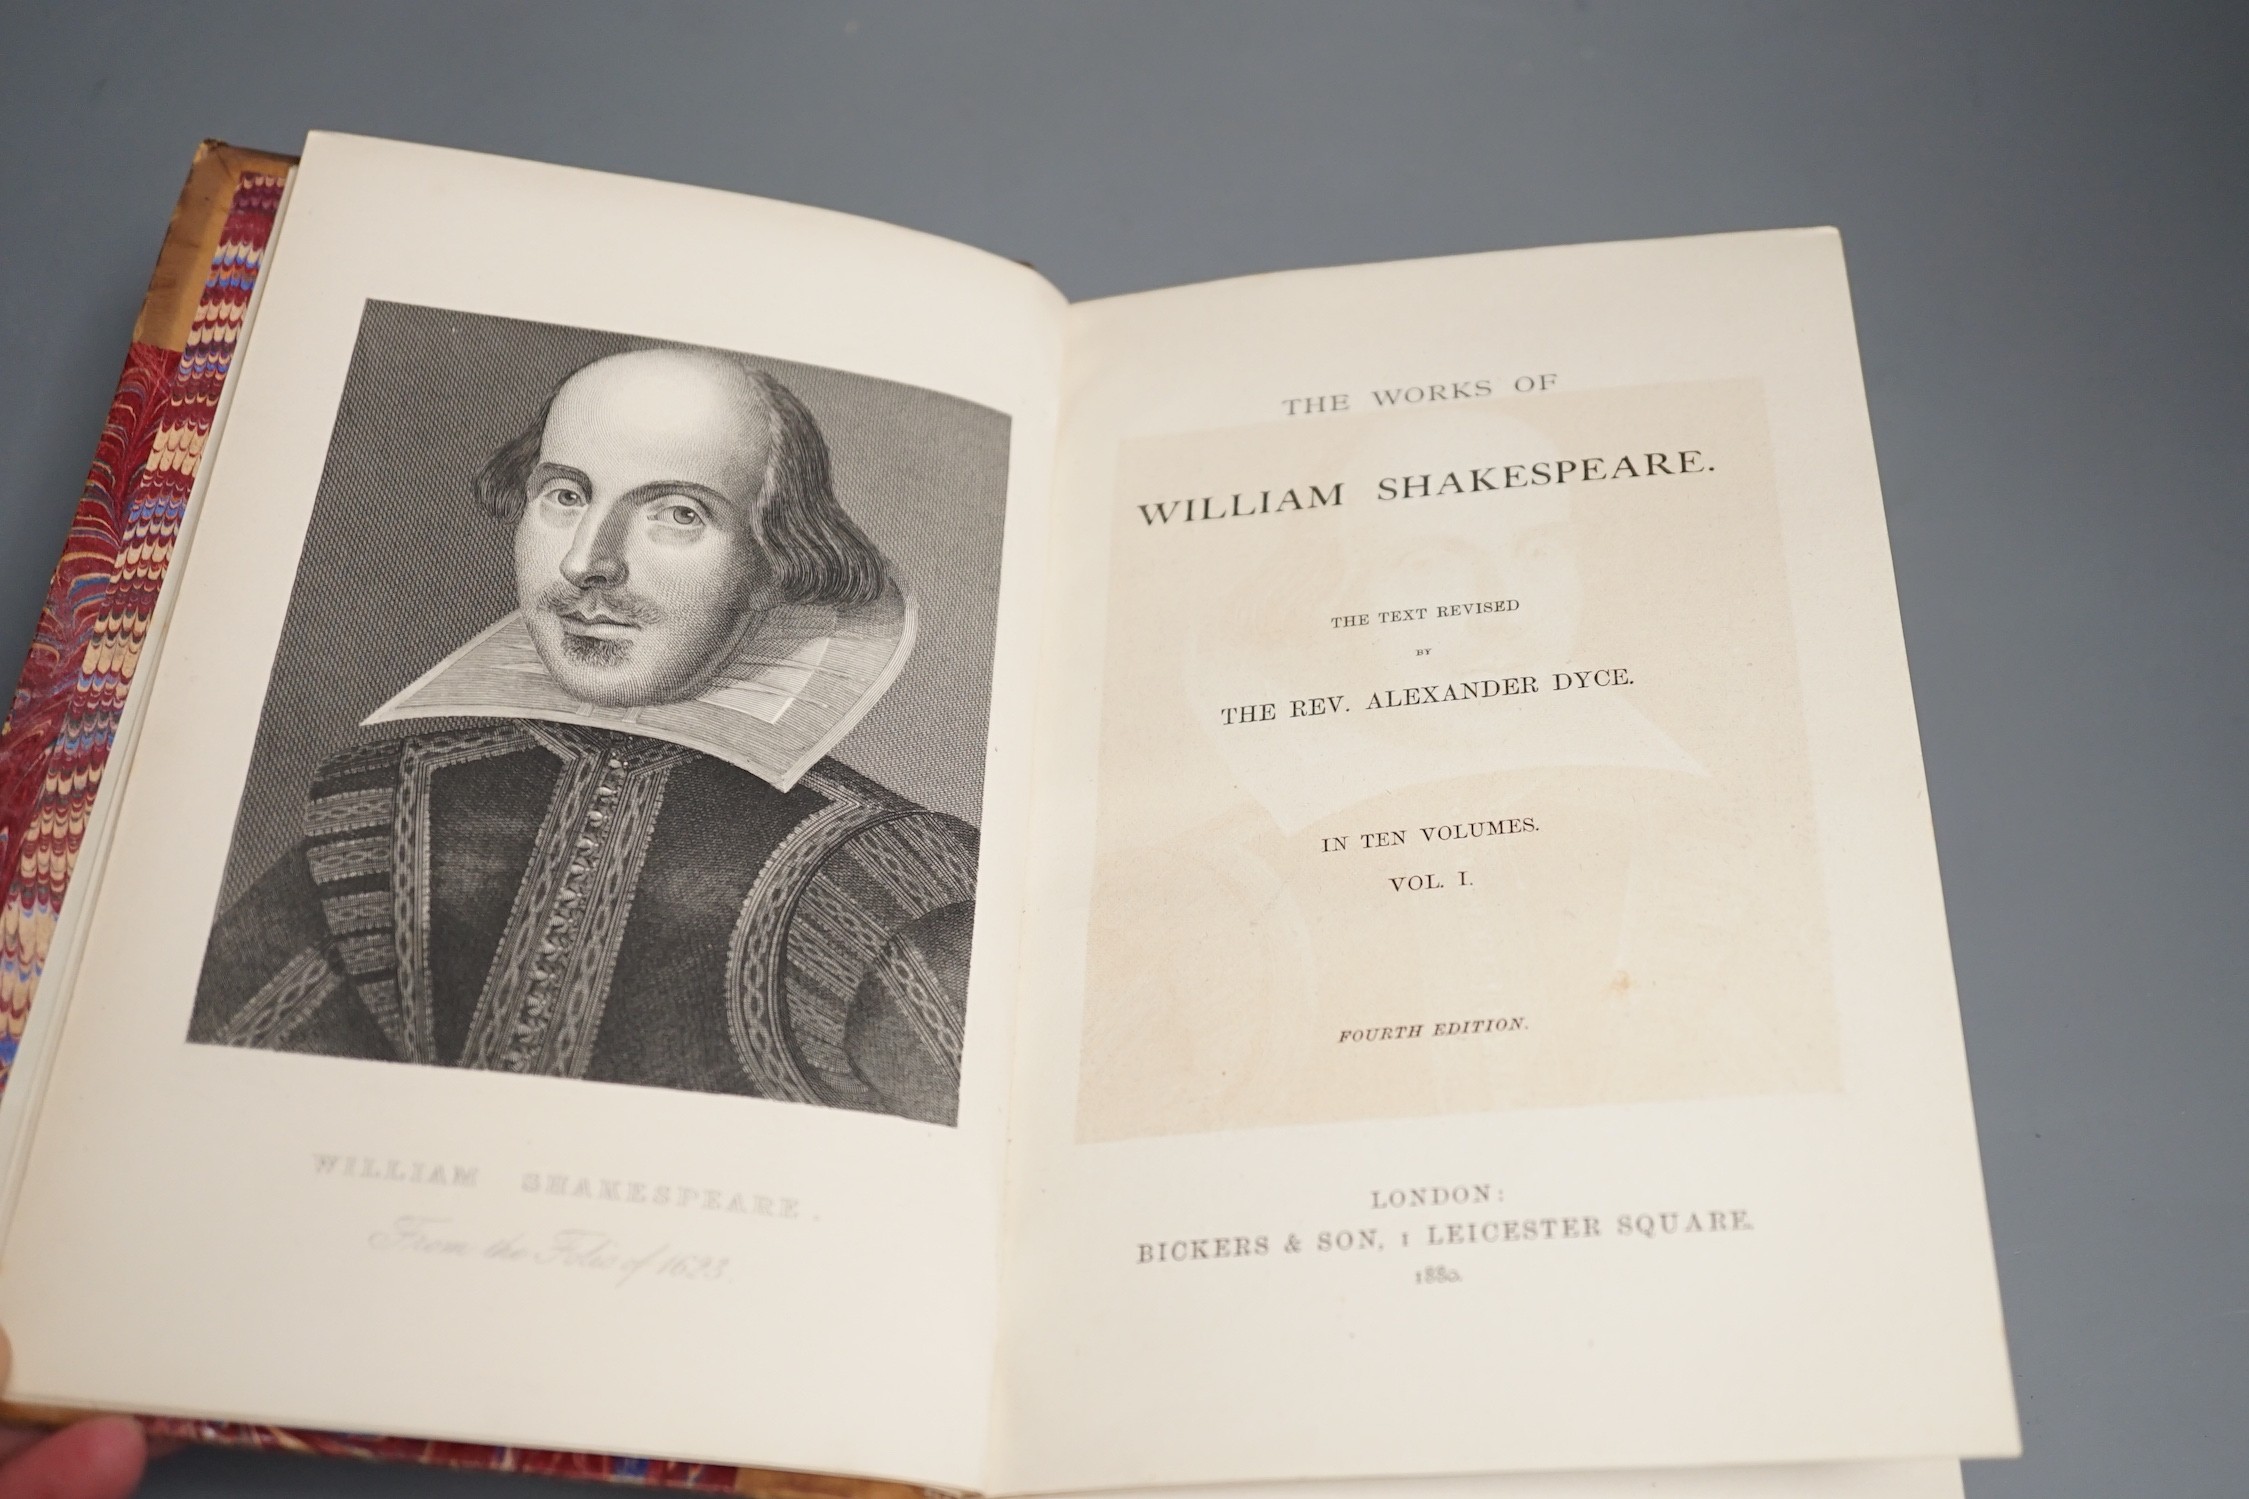 Works of Shakespeare, 10 volumes, leather bound, 22cms high